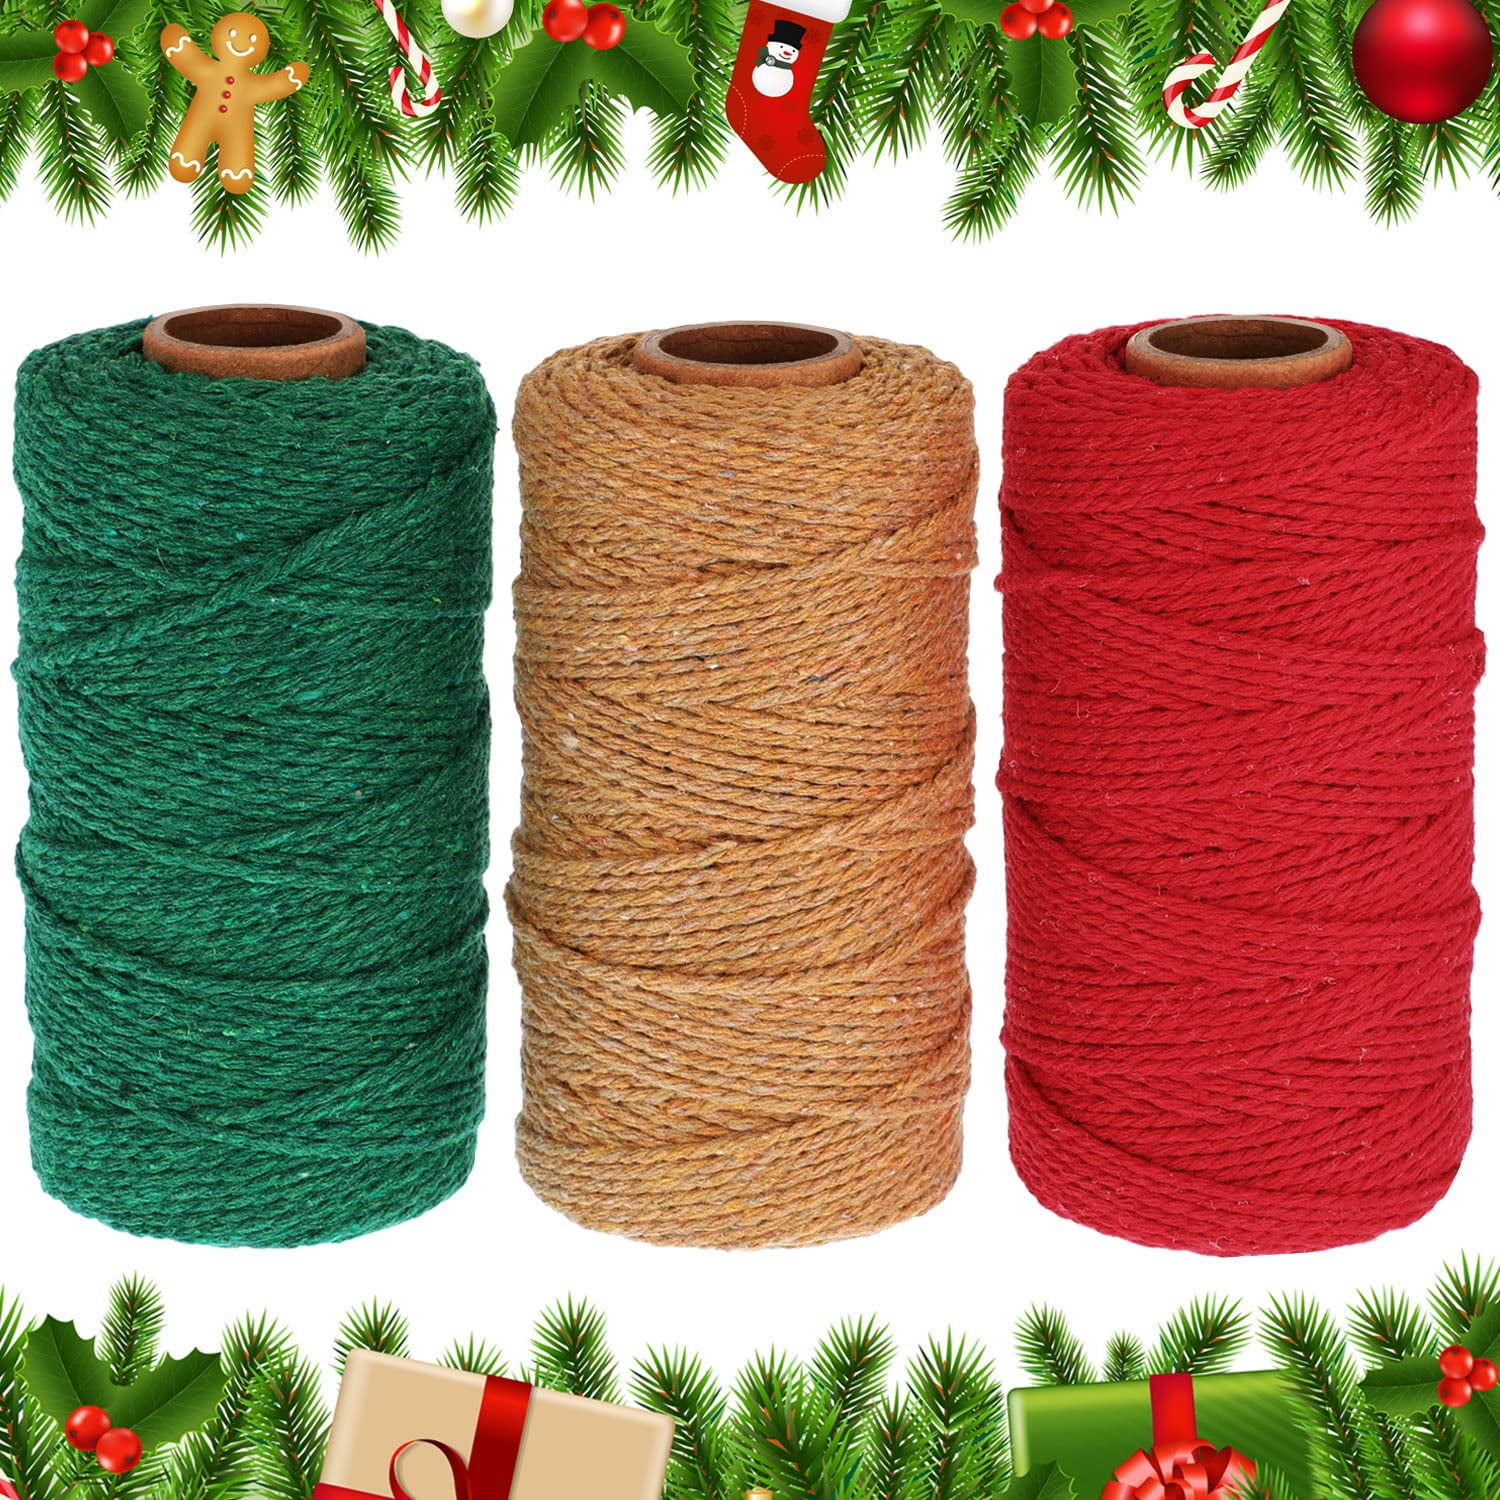 Red Jute, Red String, Red Twine, Colored String, Christmas Holiday Gift  Wrap, Rustic Gift Wrapping, Spool of String, on Wood Spool, 25 YARDS 